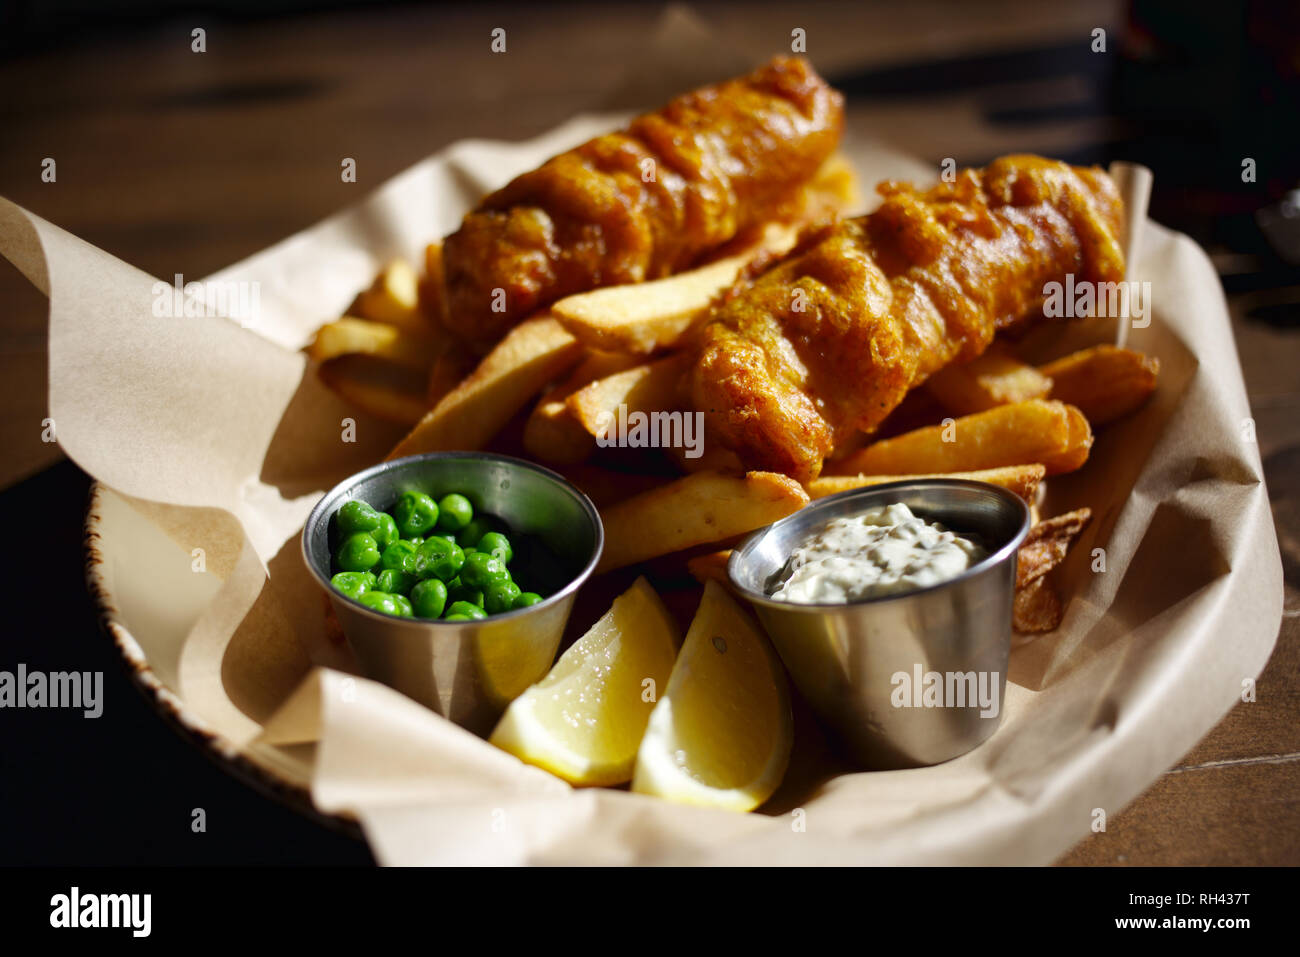 Amazing Fish and Chips - Fish and chips ordered at a sidewalk cafe in Downtown Huntington Beach, CA Stock Photo